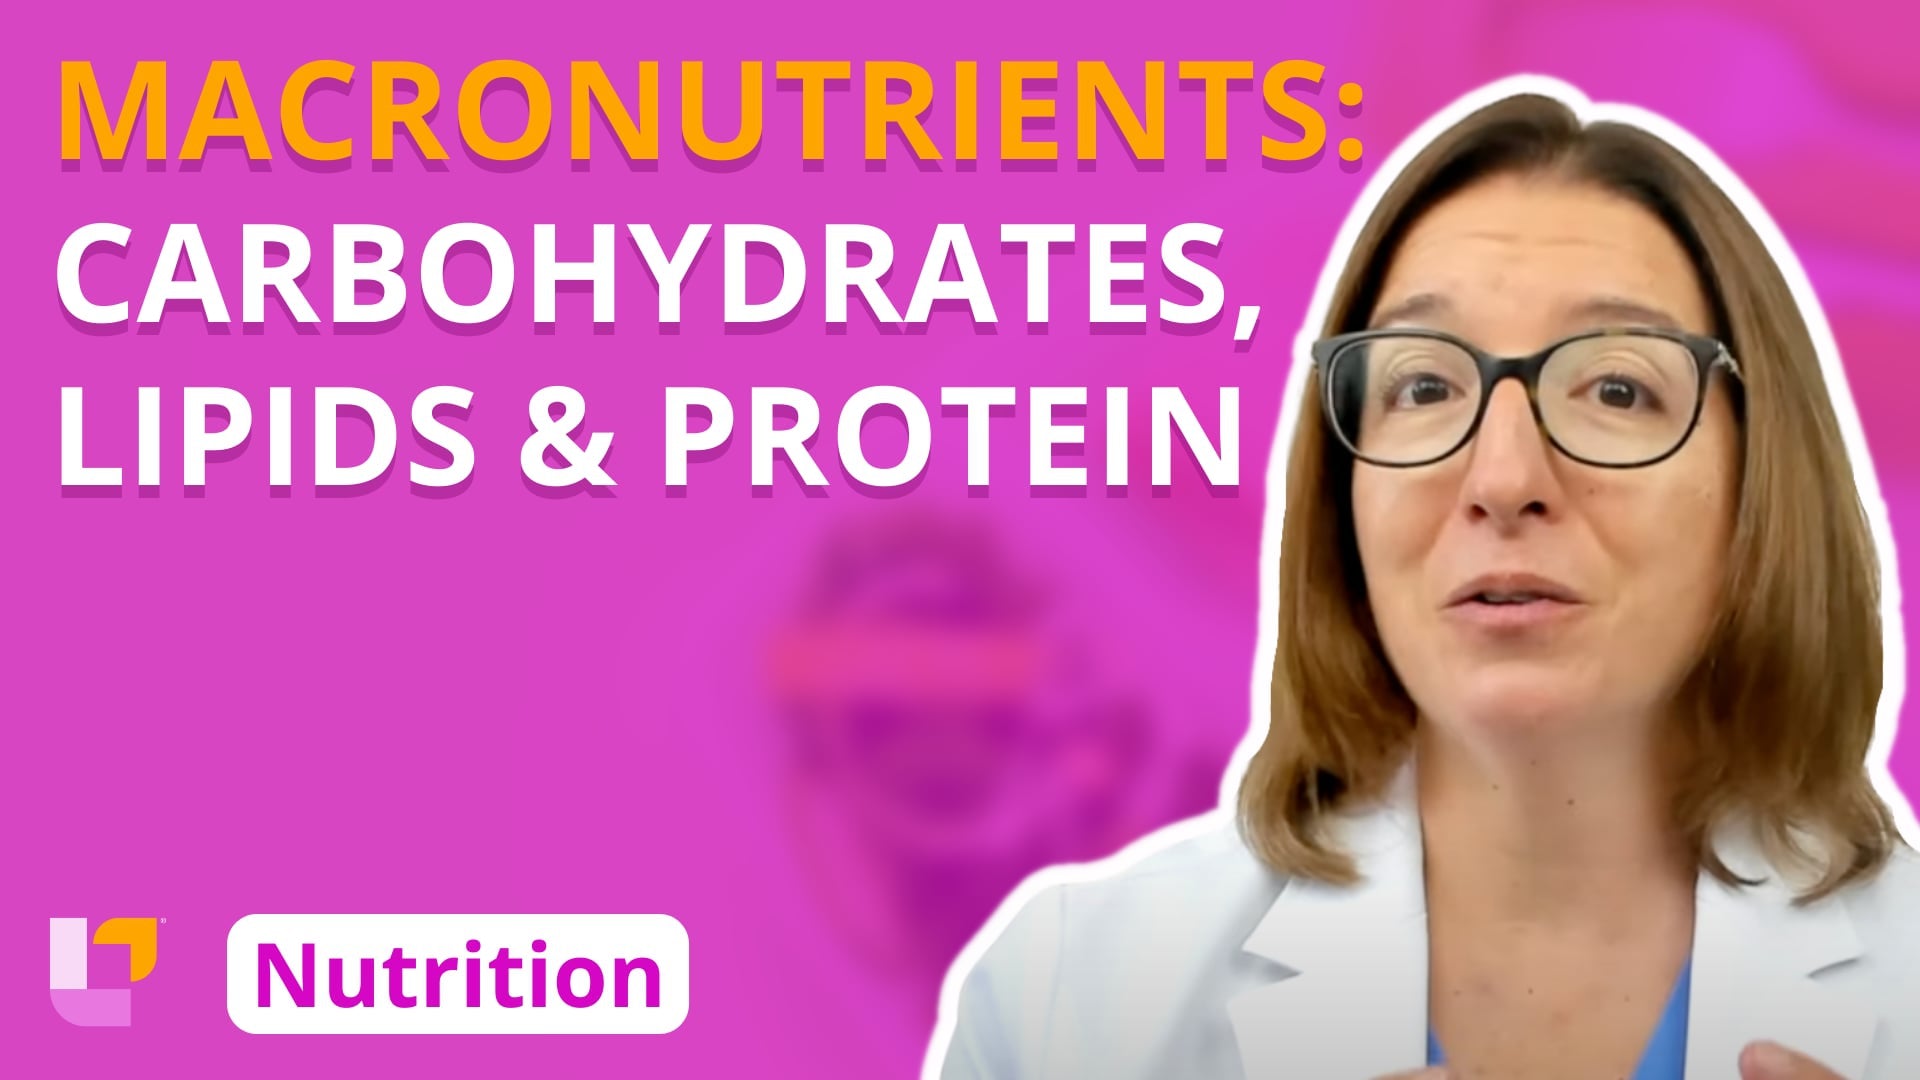 Nutrition, part 2: Macronutrients - Carbohydrates, Lipids, Protein - LevelUpRN